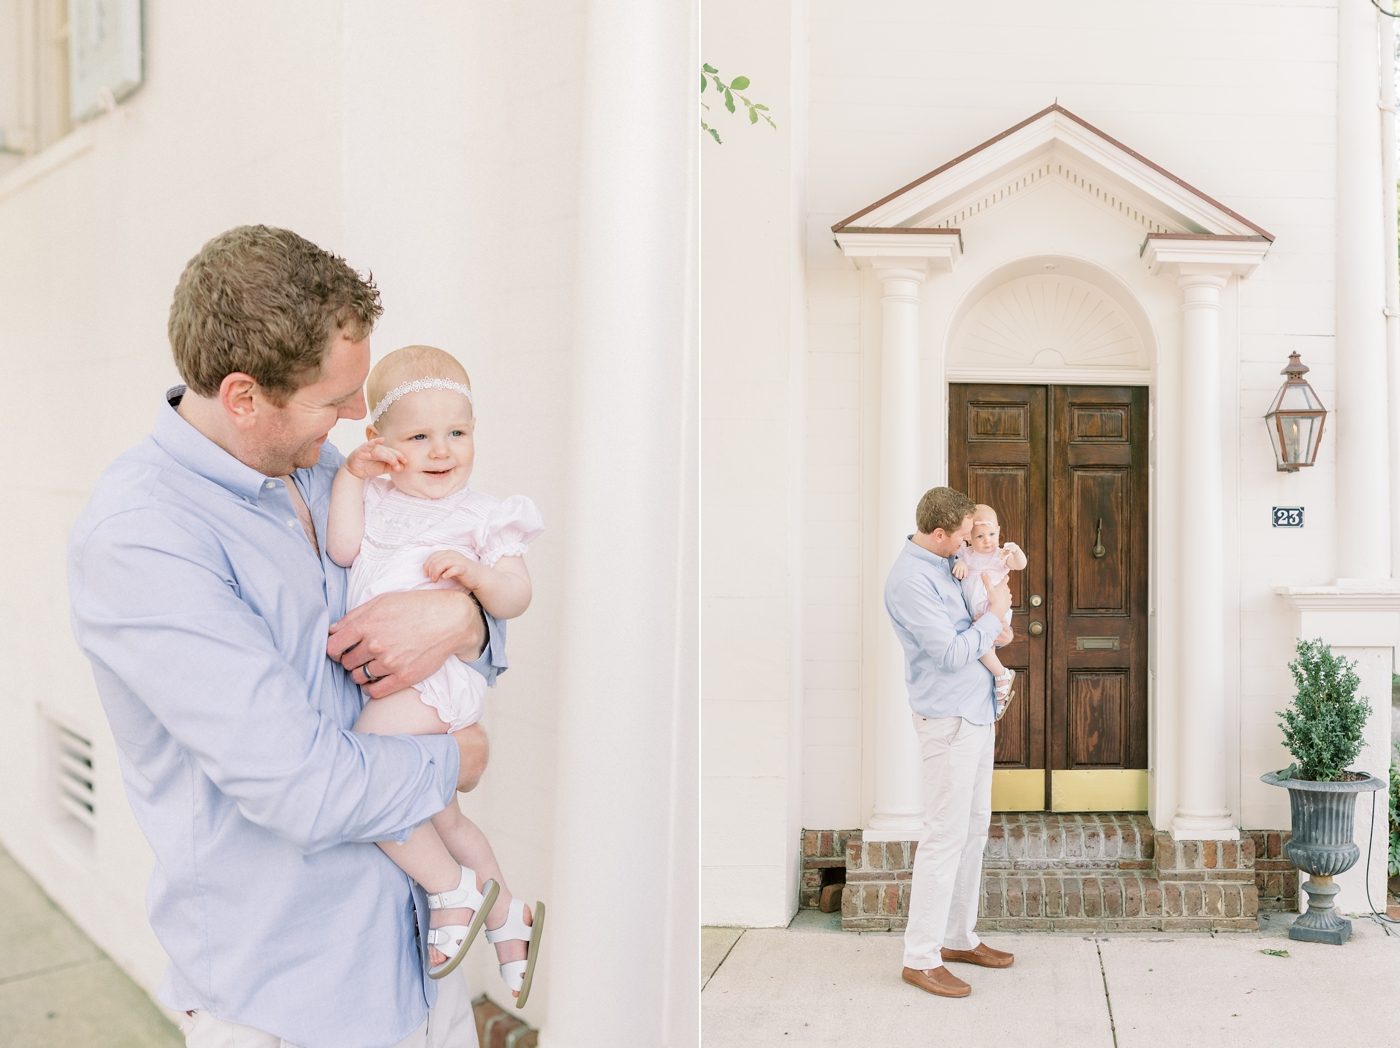 Dad holding baby girl in pink bubble downtown Charleston | Photo by Caitlyn Motycka Photography.